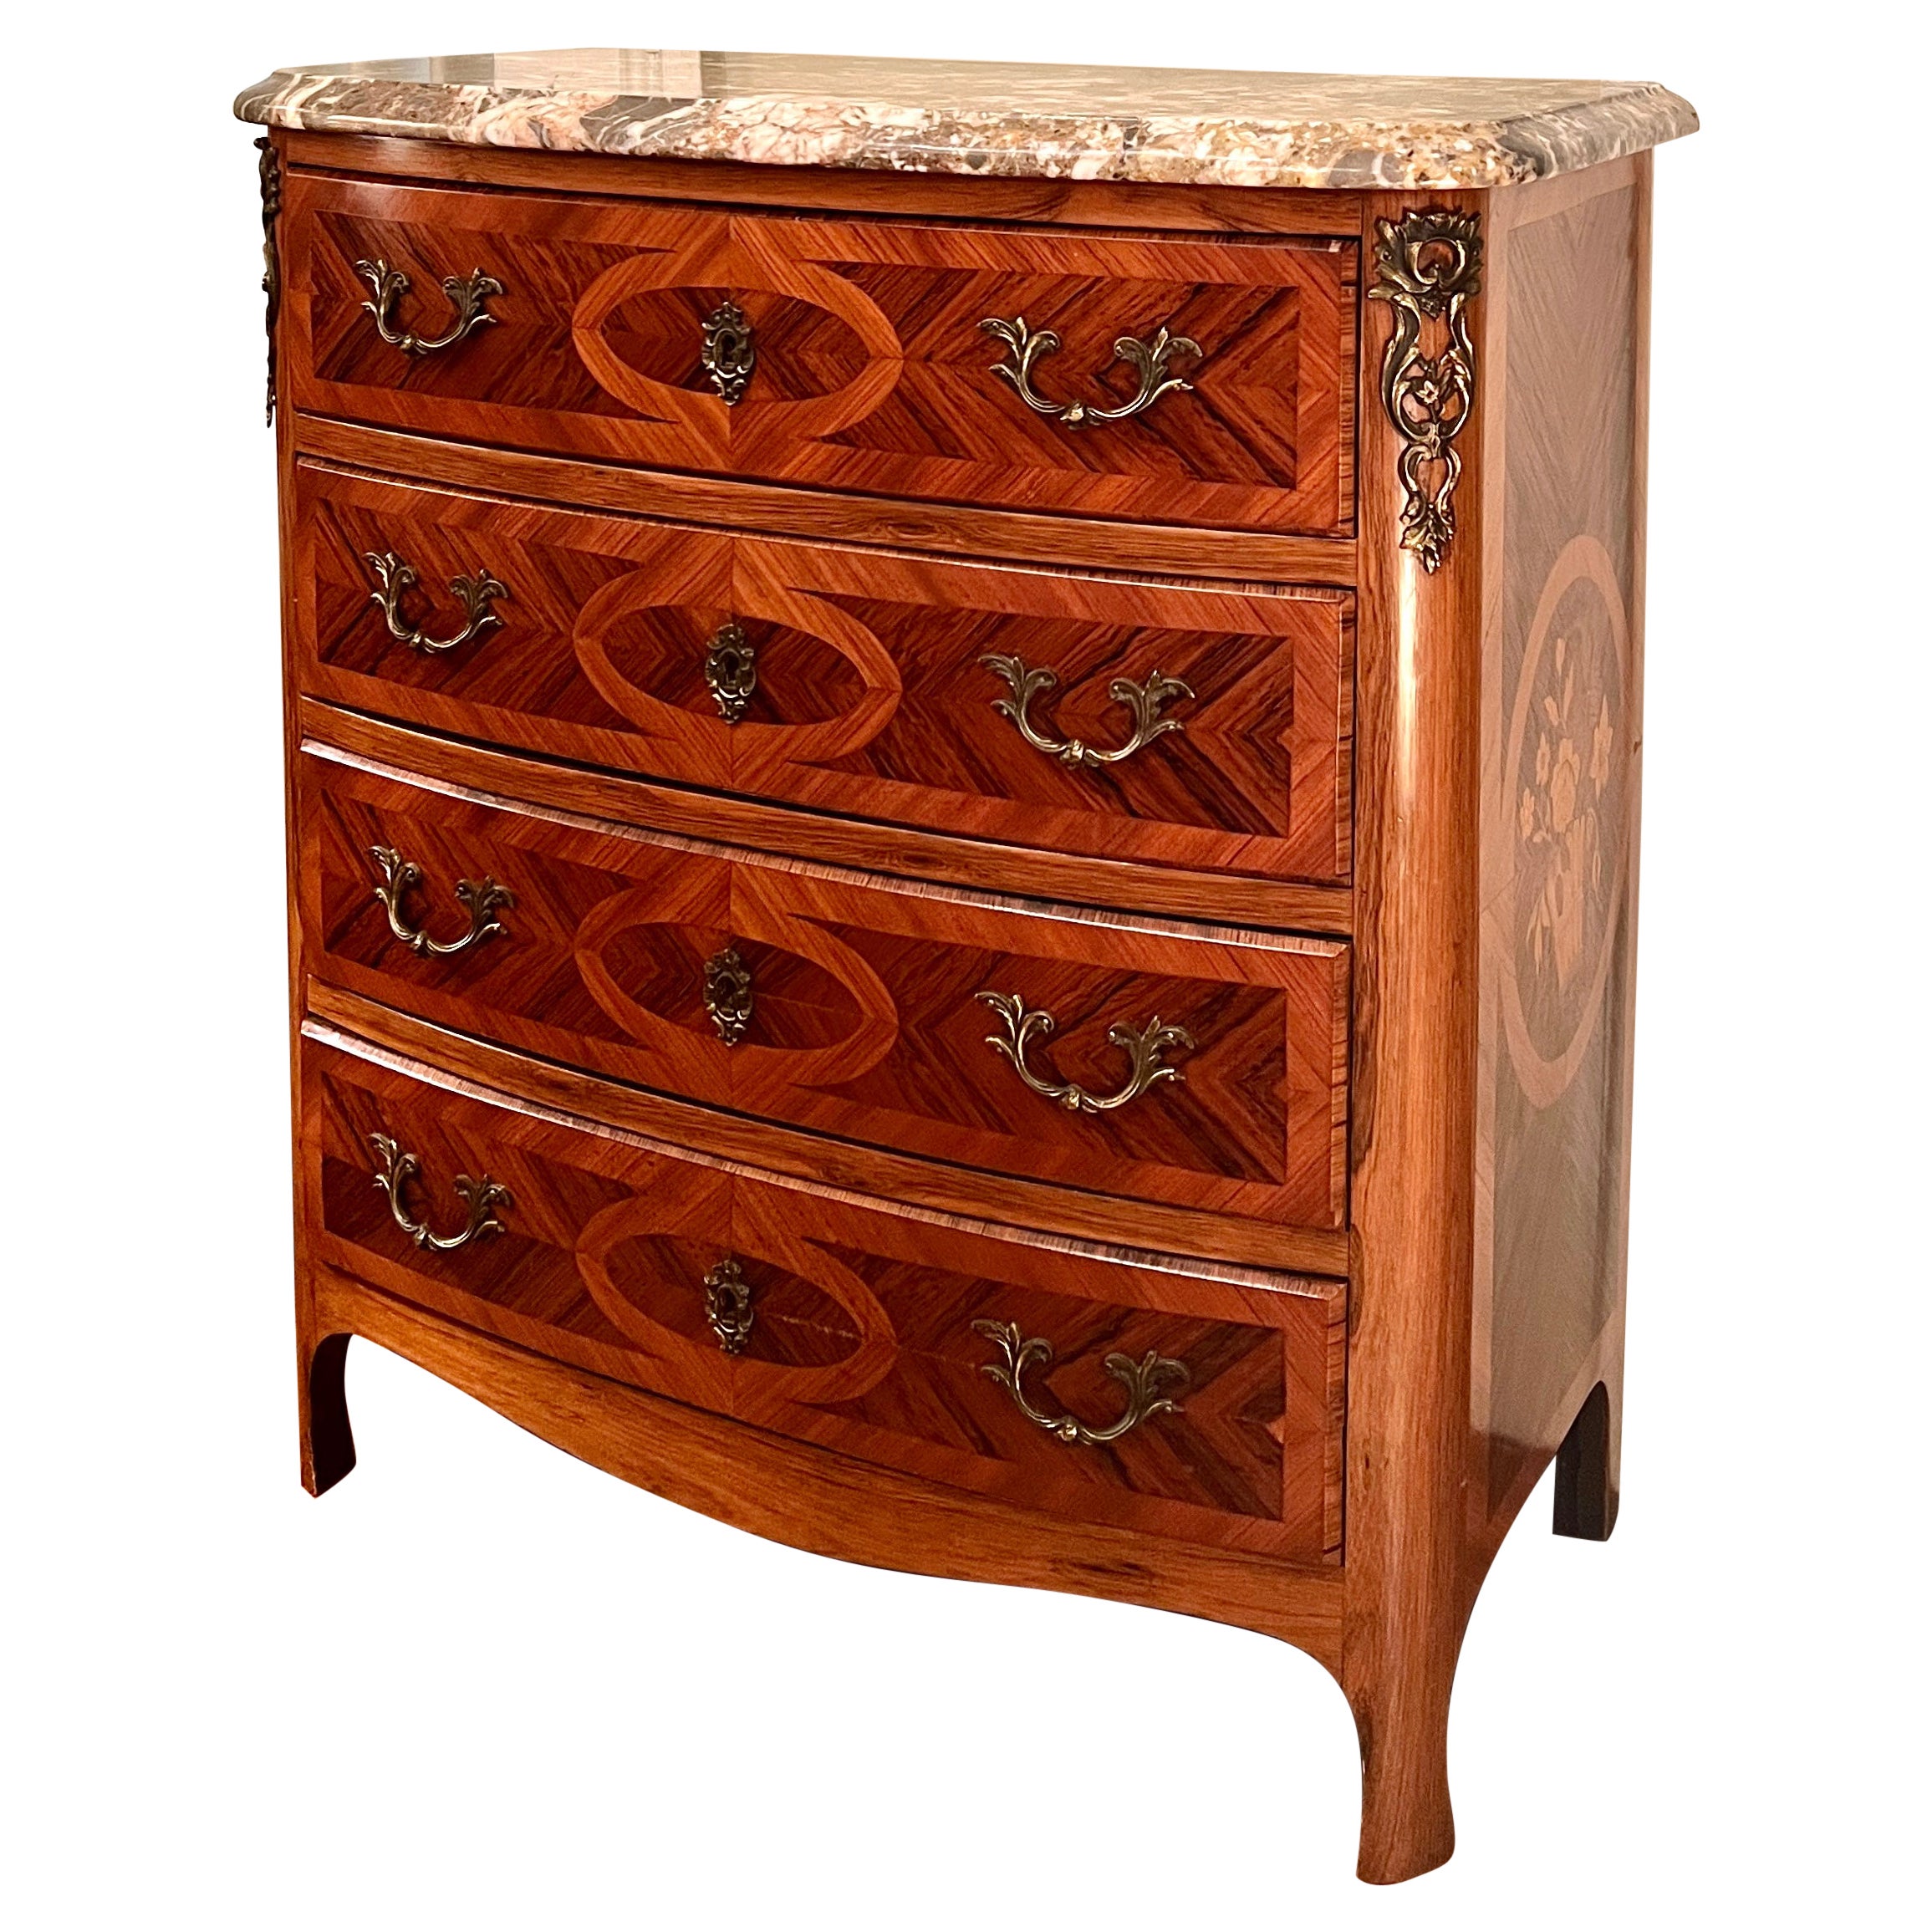 Antique French Marble Top Rosewood Chest with Satinwood Inlay, Circa 1900. For Sale